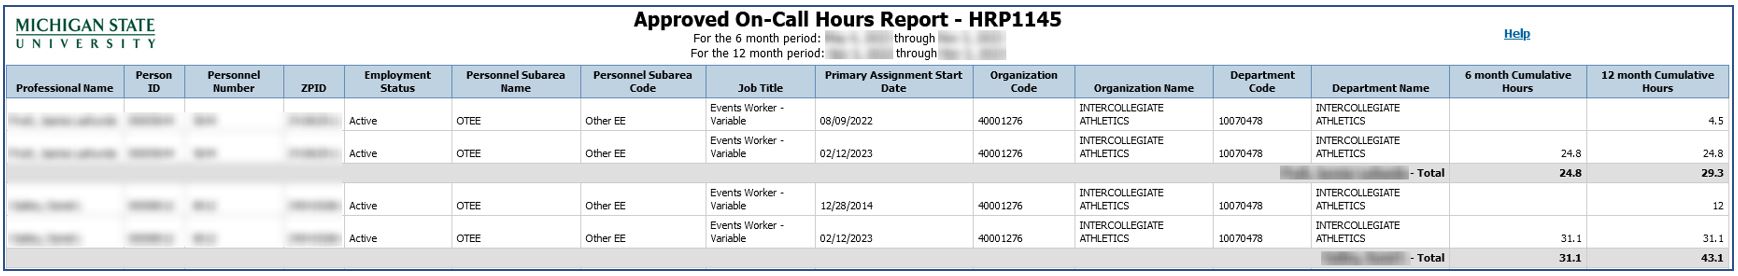 Approved On-Call Hours Report